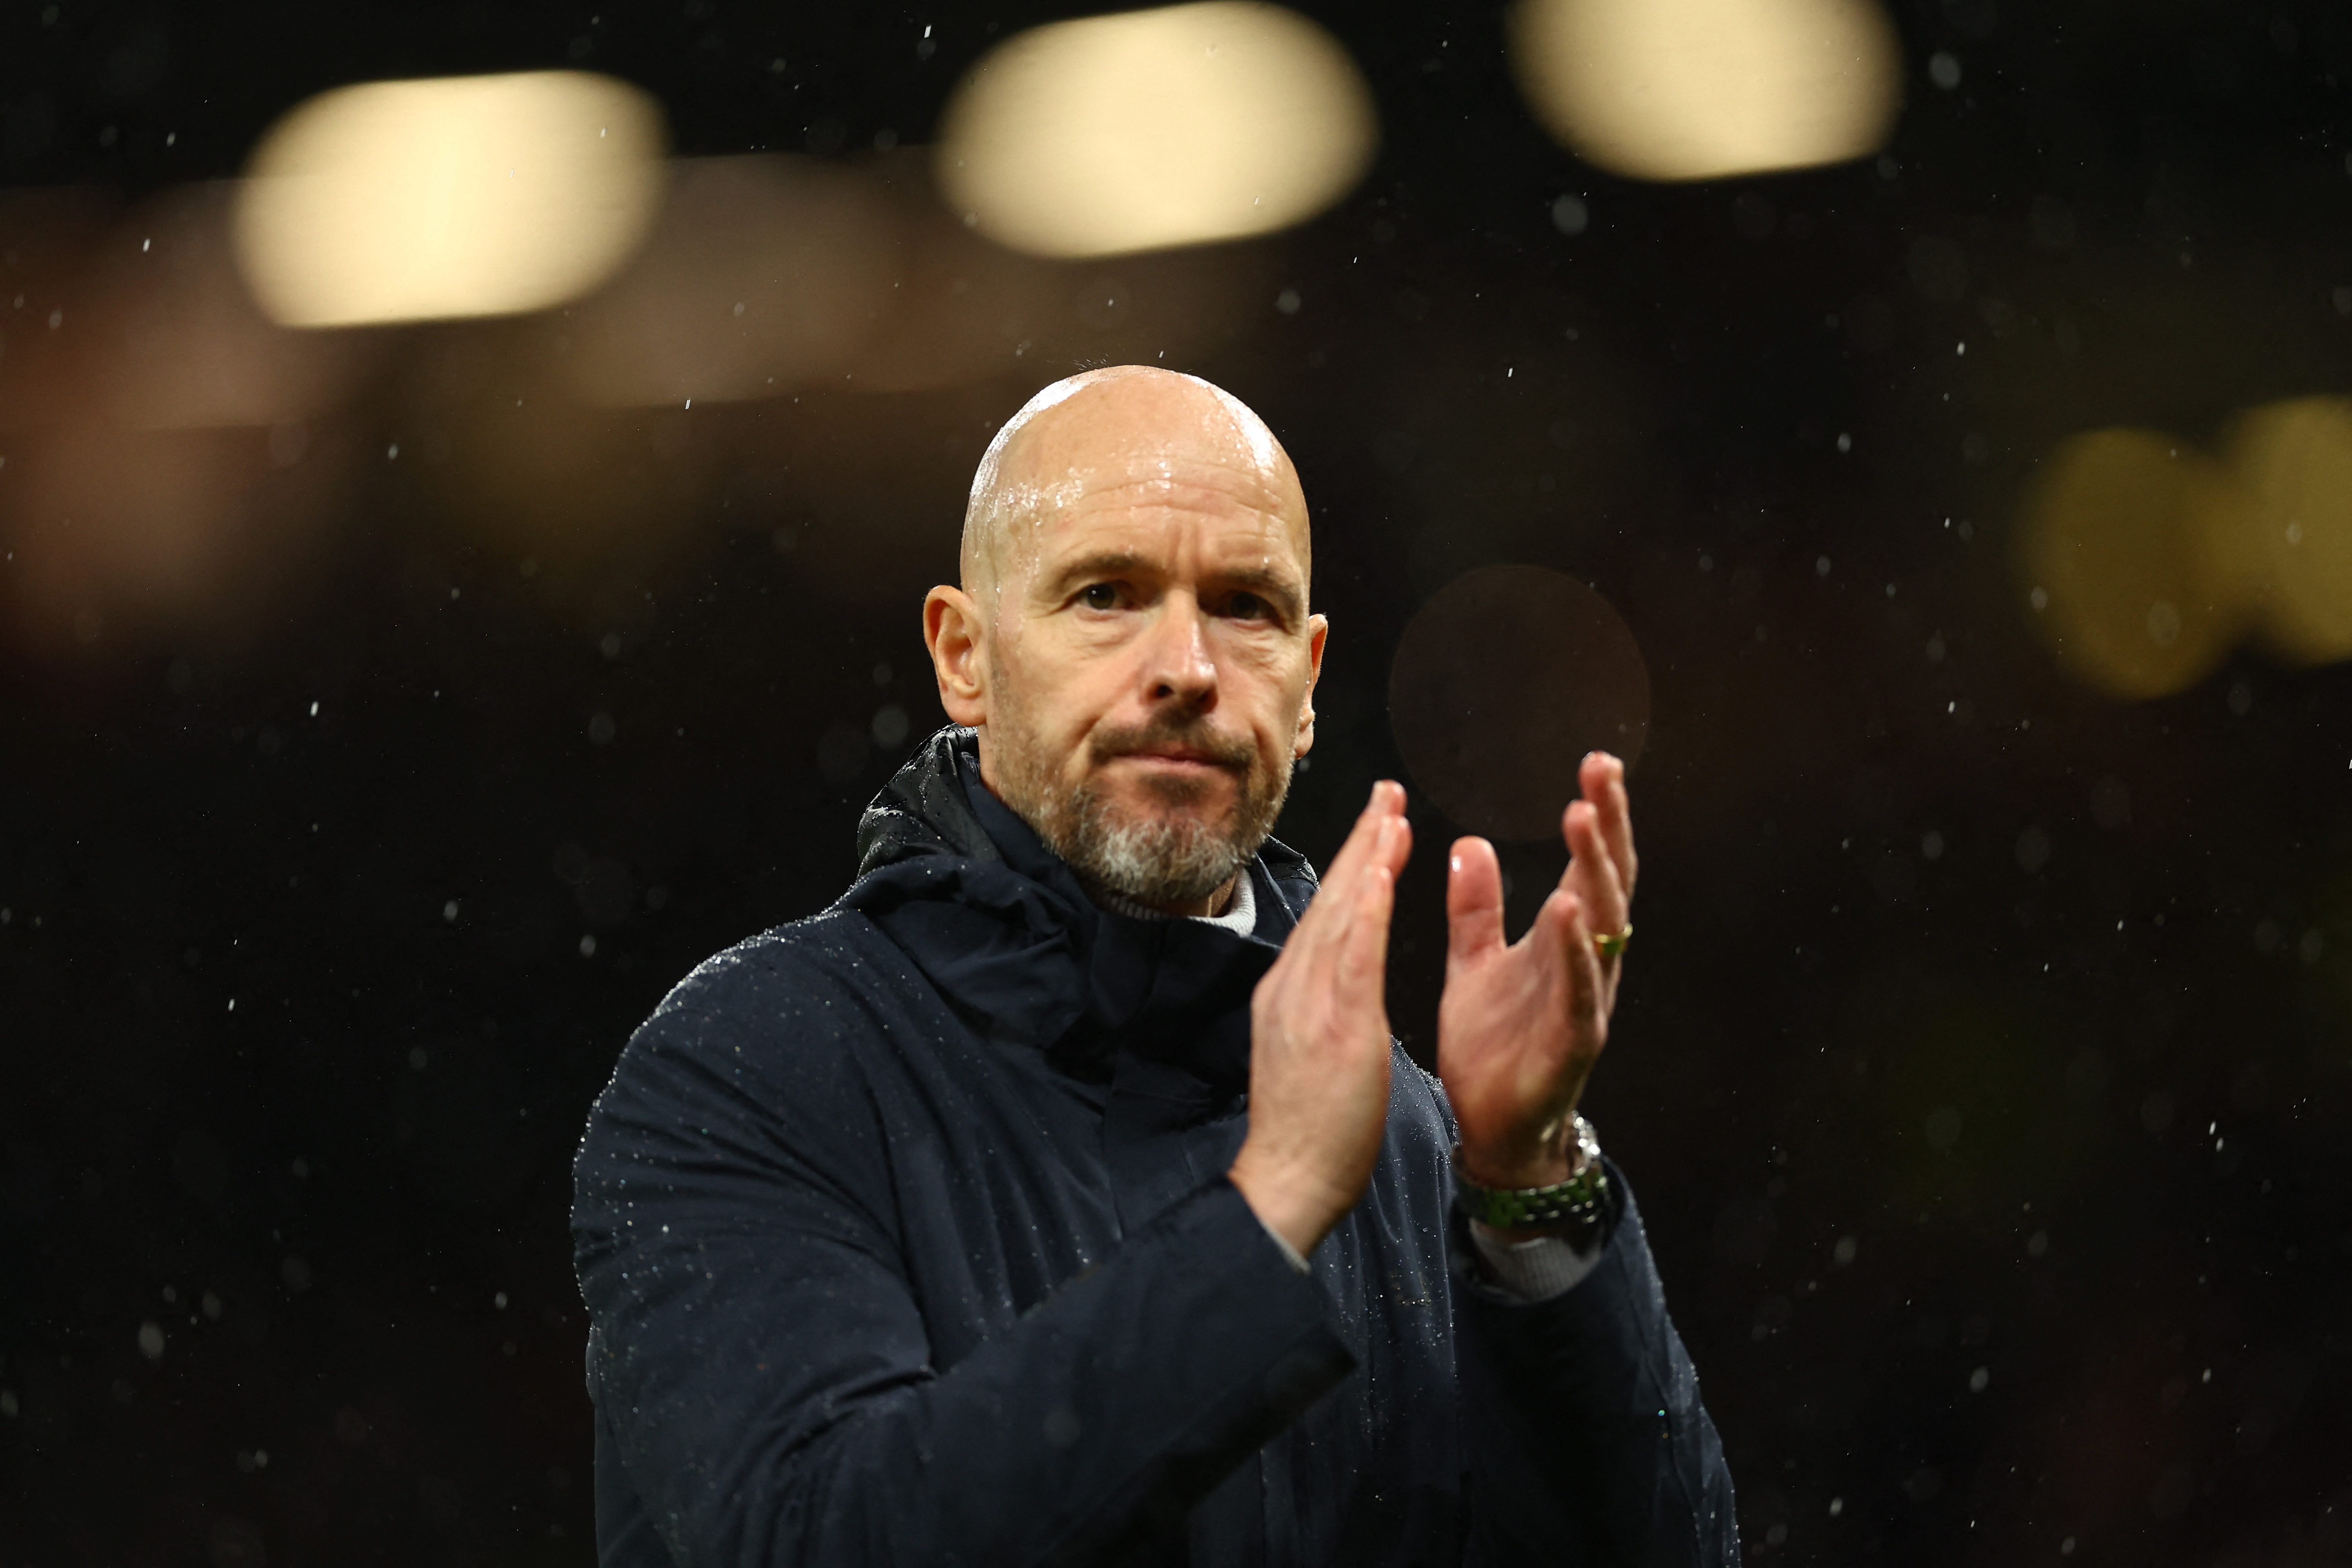 Erik ten Hag's coaching abilities leave much to be desired